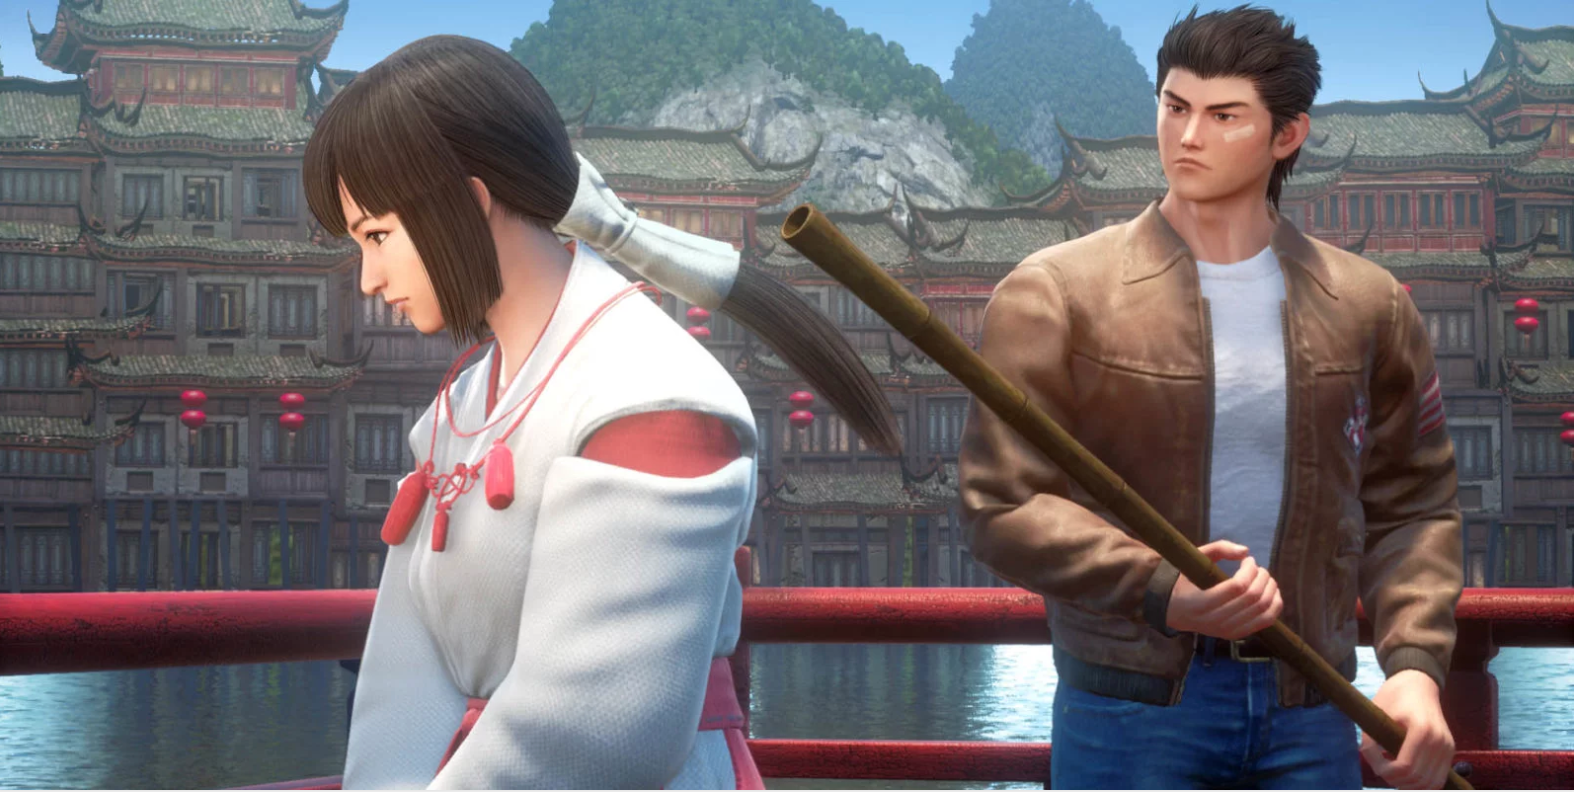 Shenmue 3 Feels Like A 90s Throwback, For Better And For Worse